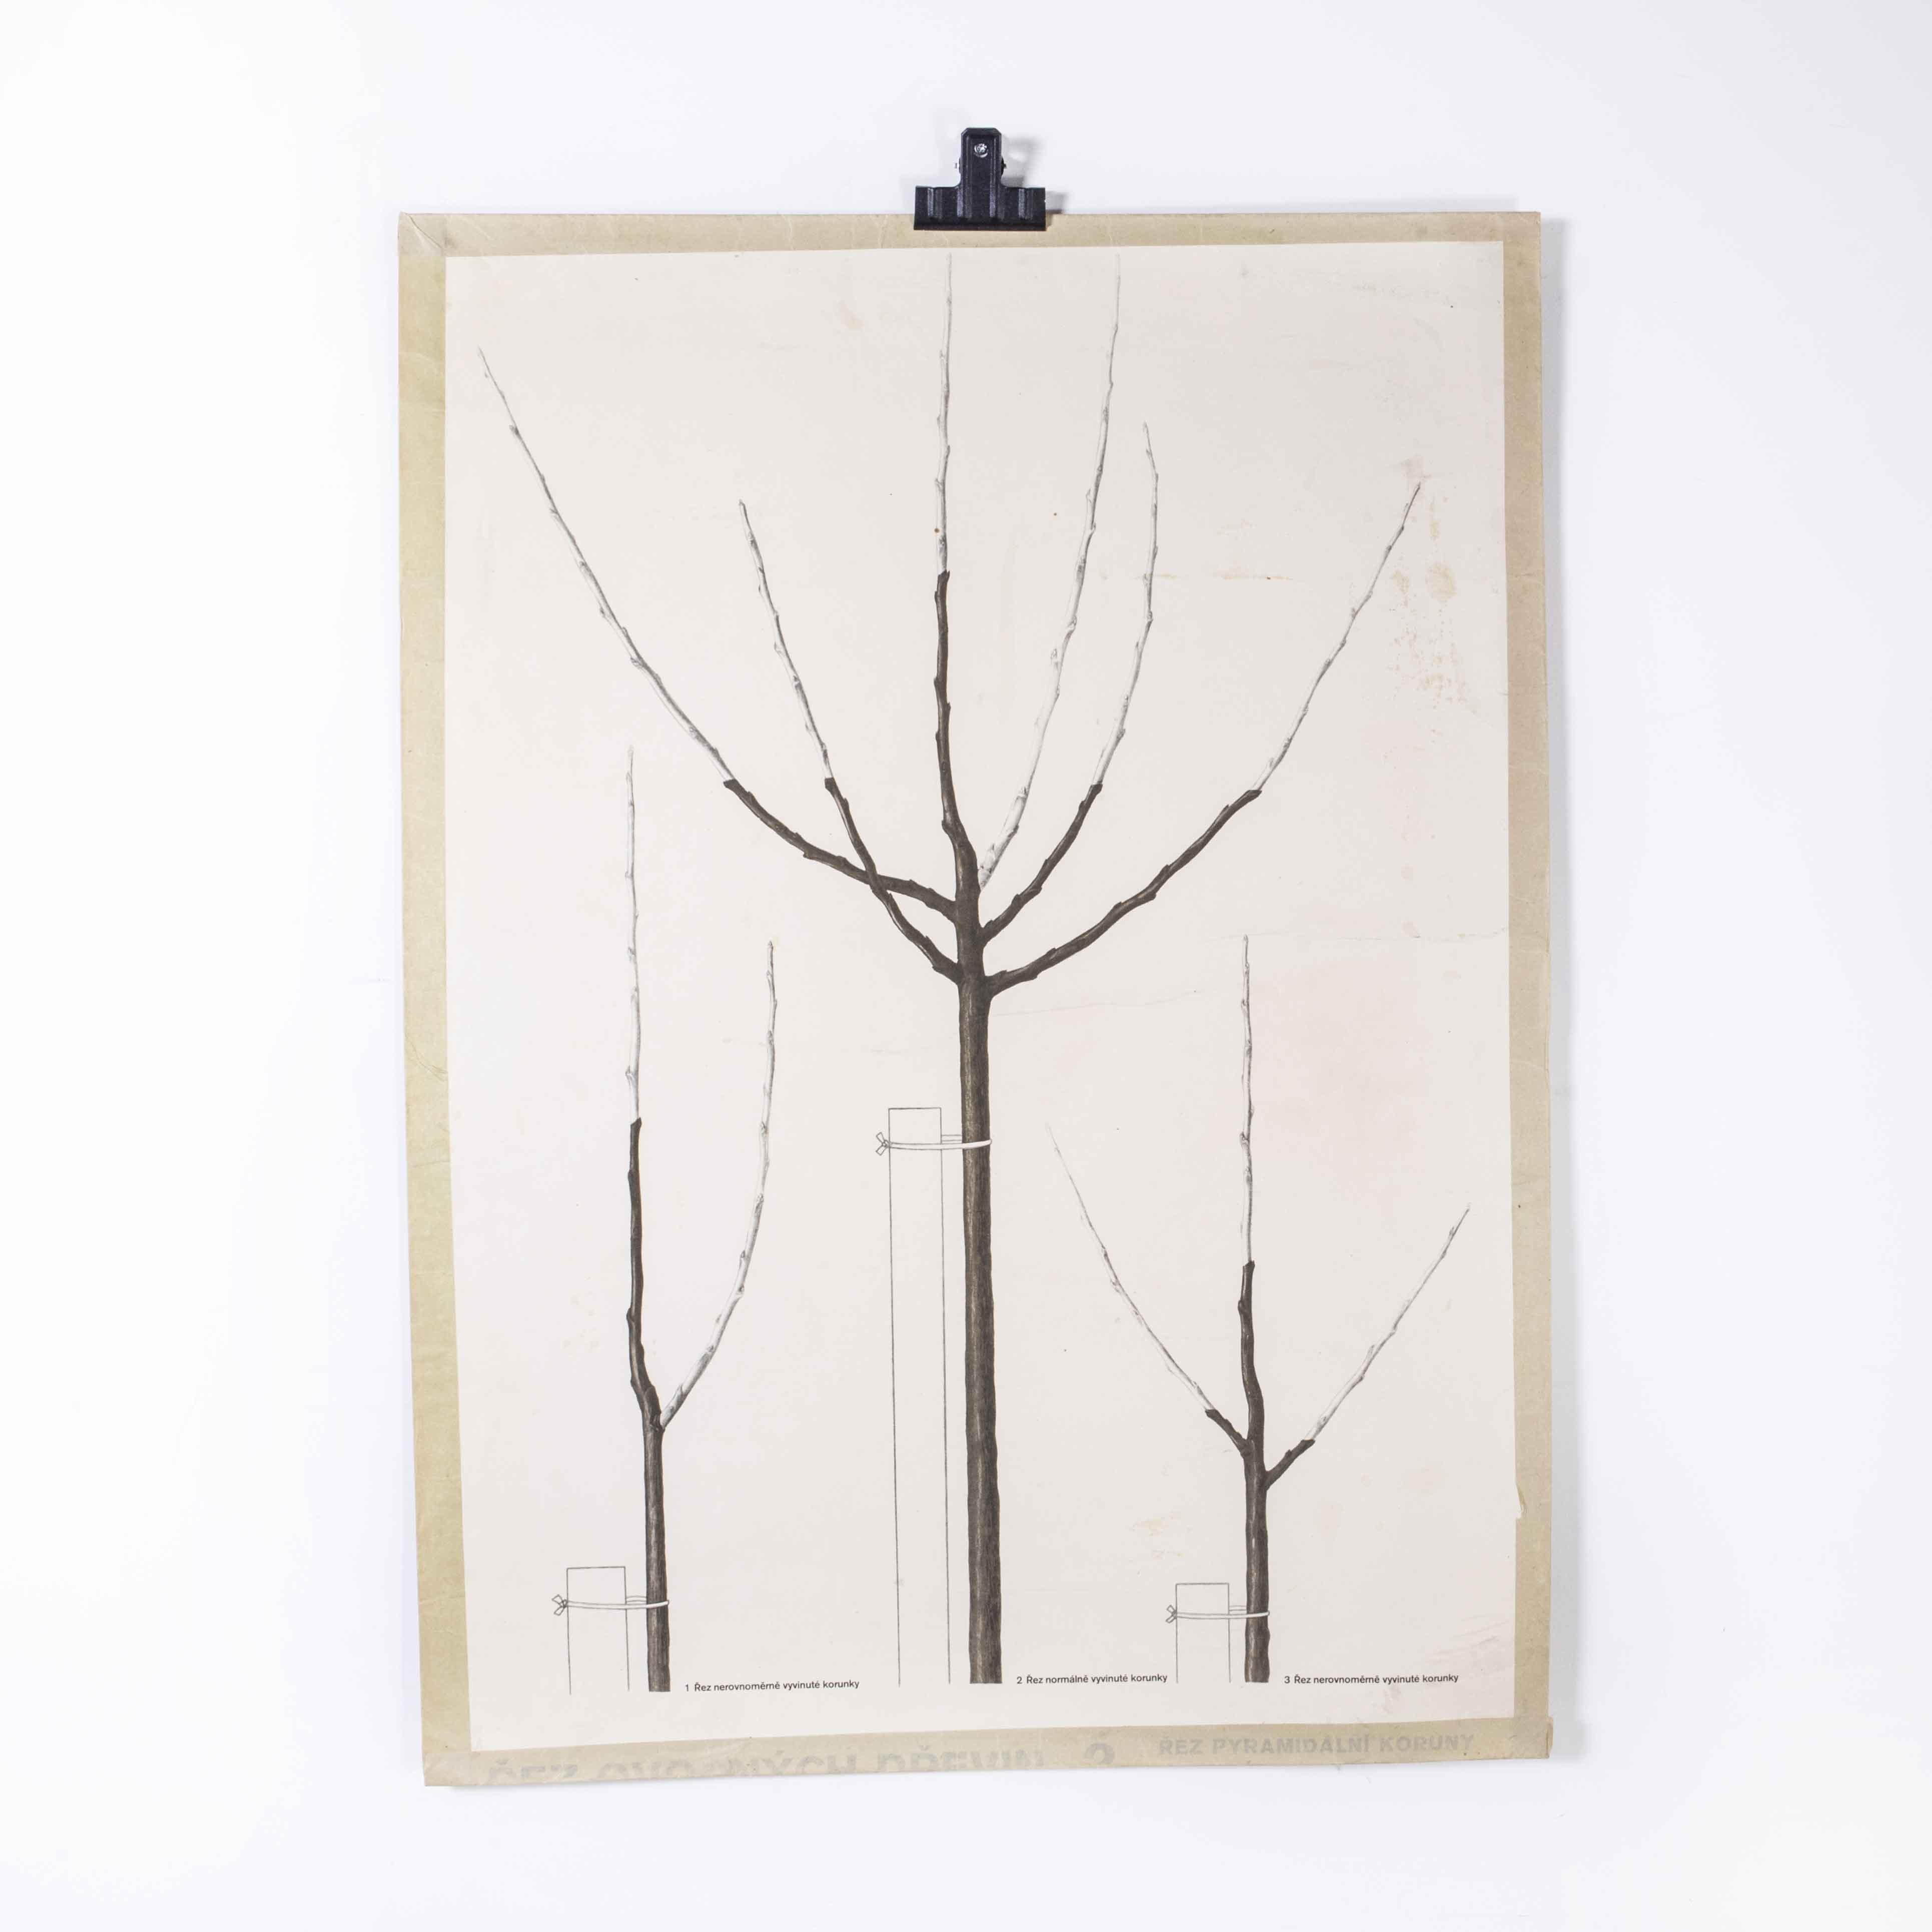 1970’s Three bare tree educational poster
1970’s Three bare tree educational poster. 20th Century Czechoslovakian educational chart. A rare and vintage wall chart from the Czech Republic illustrating a tree and its bare branches. This heavyweight